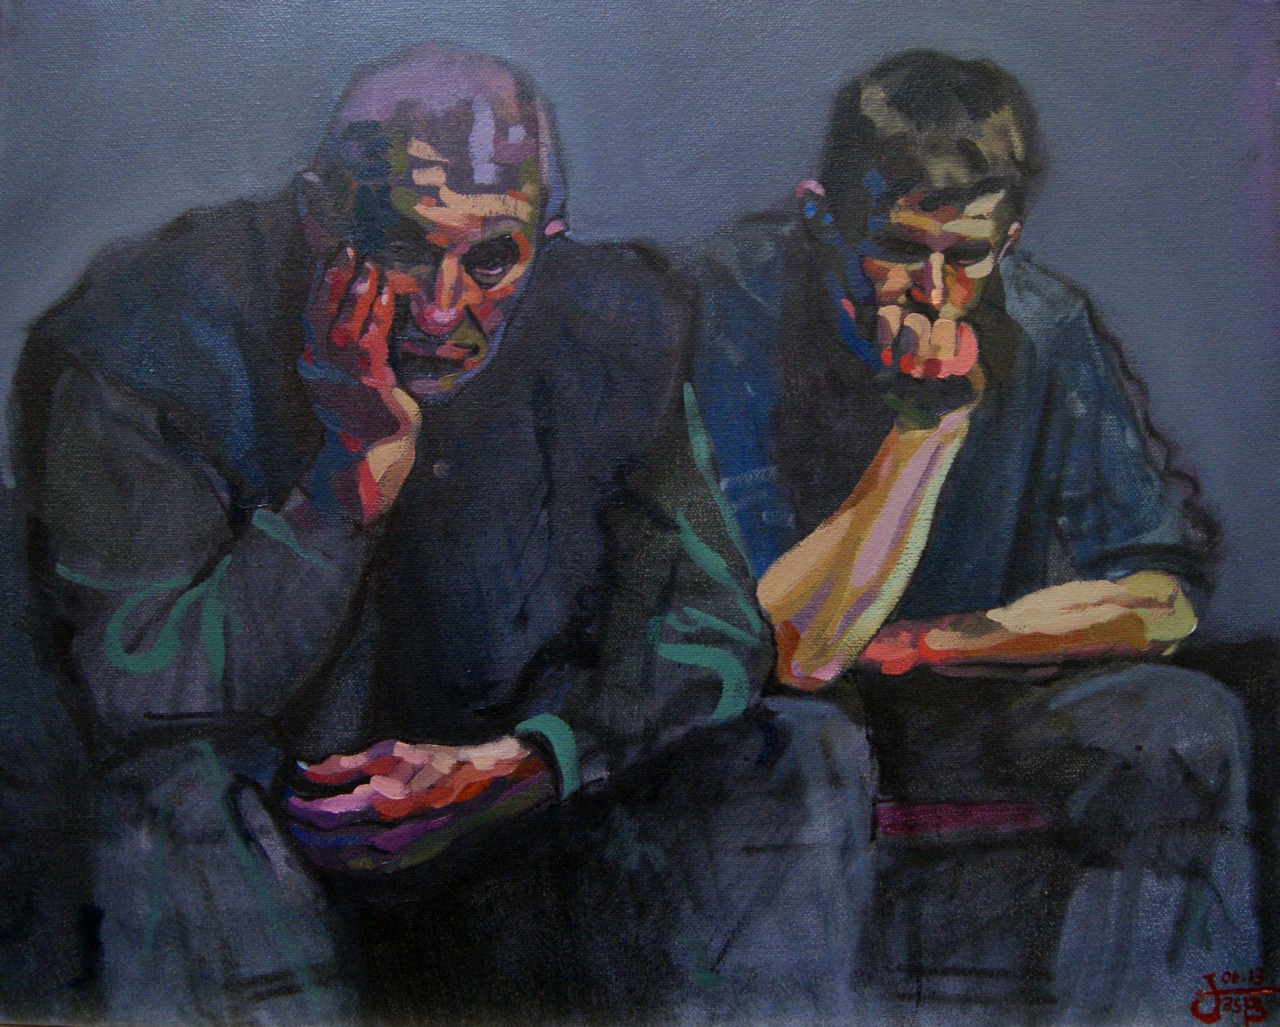 A Fair Deal, Oil on canvas, 40 x 50cm. A painting from my Auction Mart series. Jack Banister http://jackbsbanister.tumblr.com/